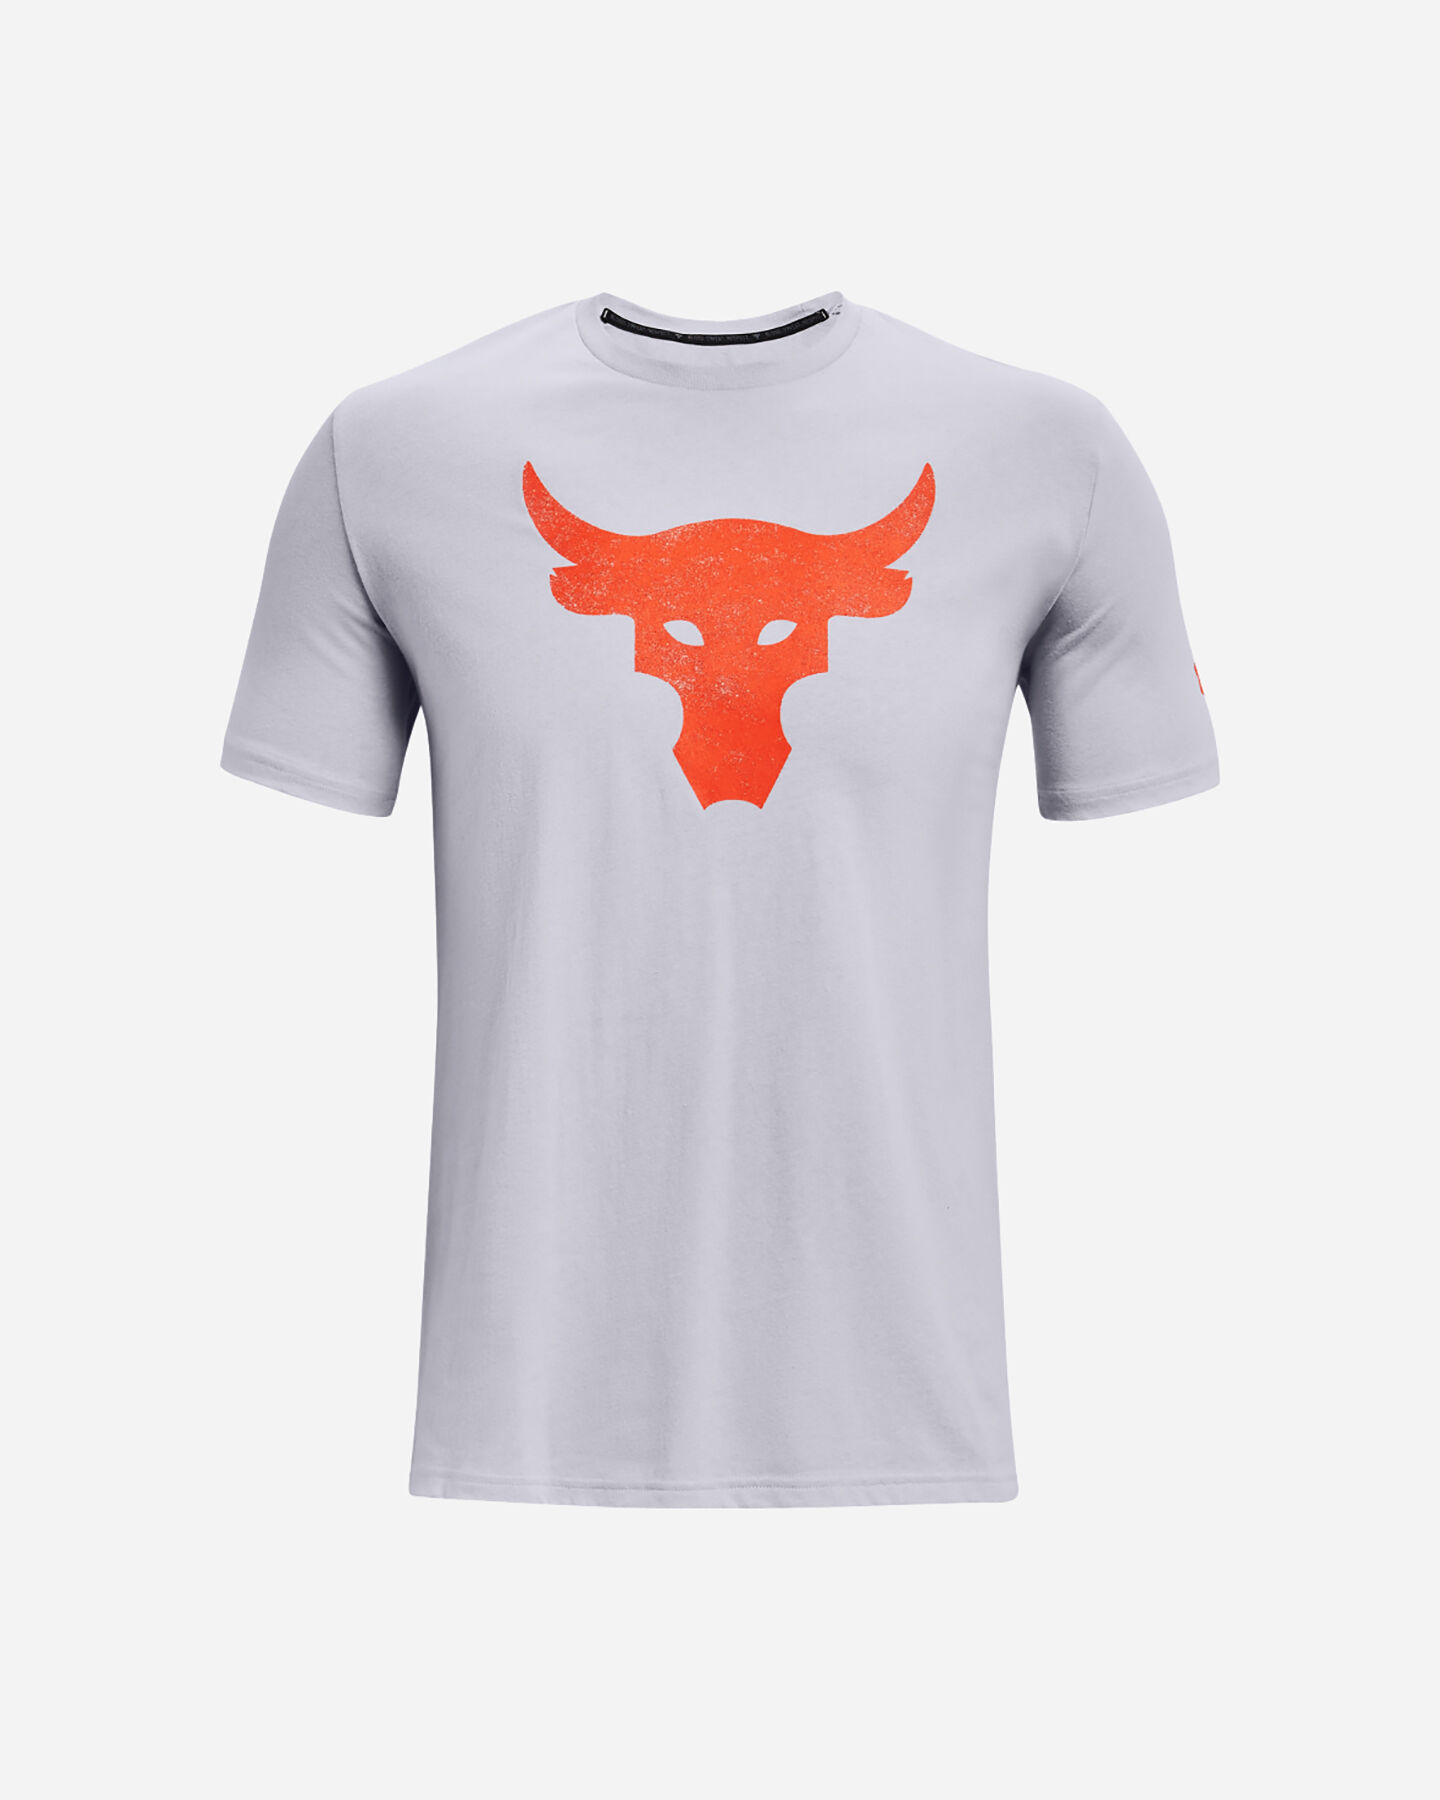  T-Shirt UNDER ARMOUR THE ROCK BULL LOGO M S5300568|0011|XS scatto 0